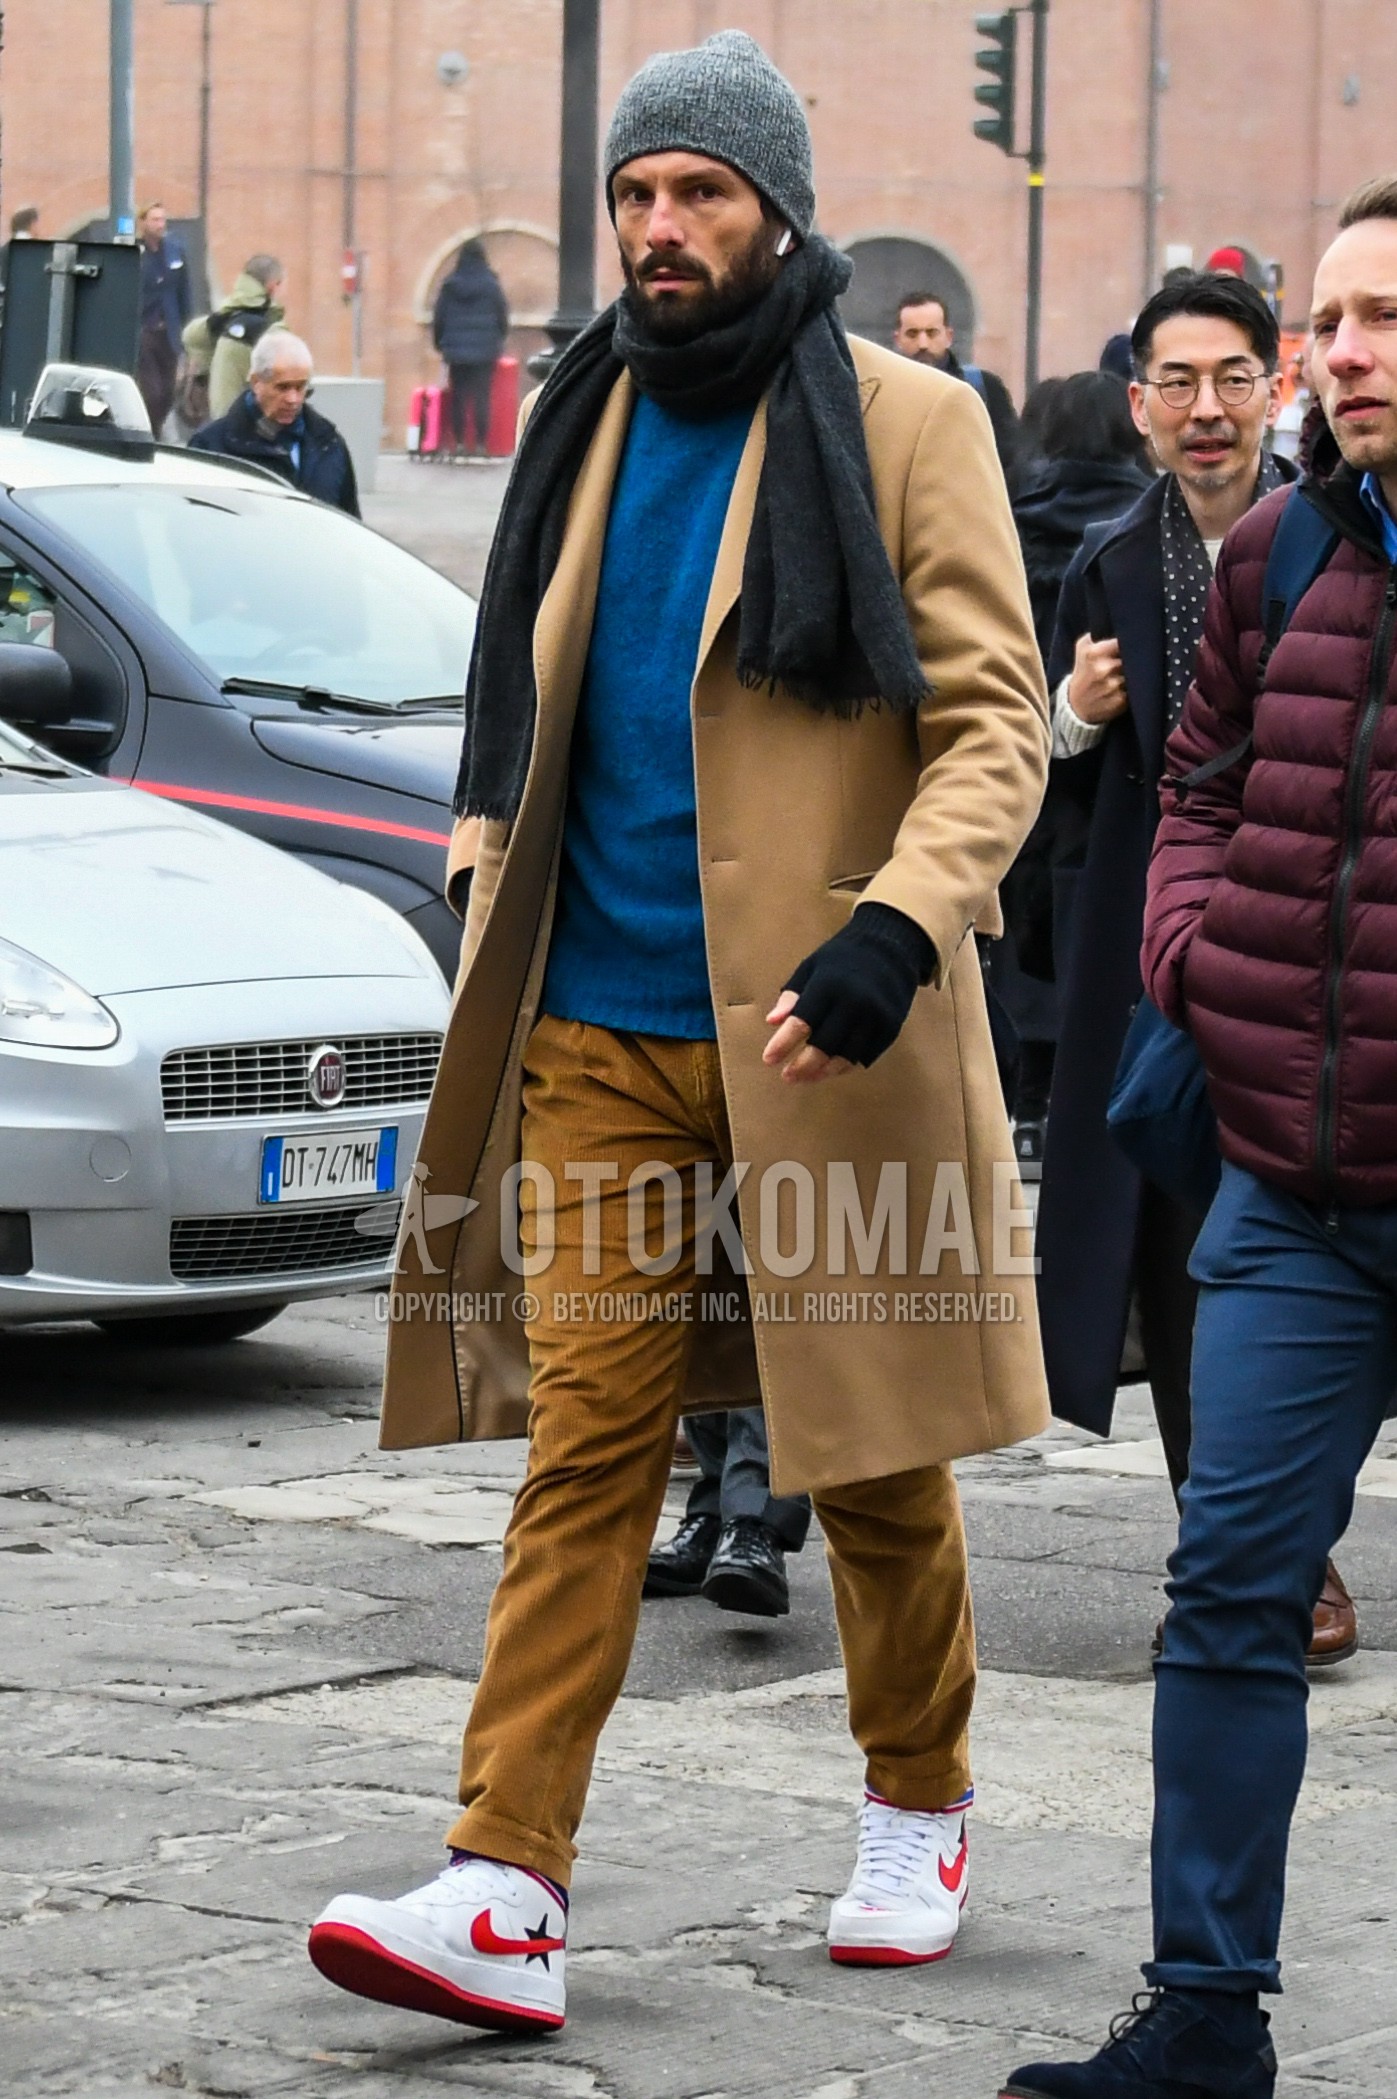 Men's winter outfit with gray plain knit cap, dark gray plain scarf, brown plain chester coat, blue plain sweater, brown plain winter pants (corduroy,velour), white high-cut sneakers.